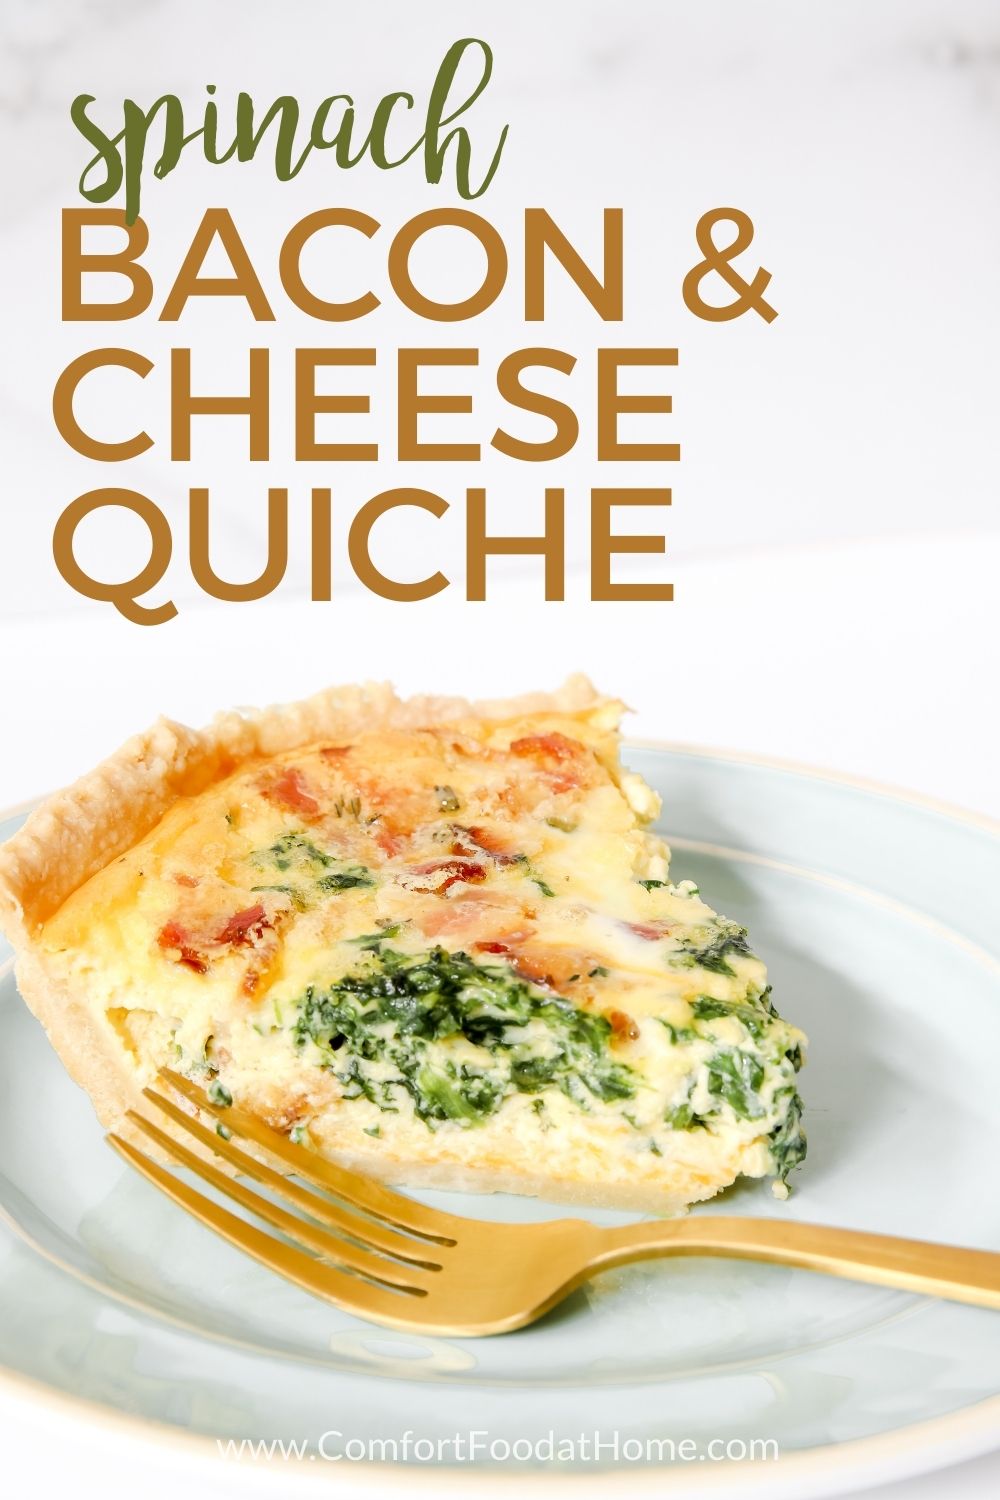 Bacon & Cheese Quiche with Spinach